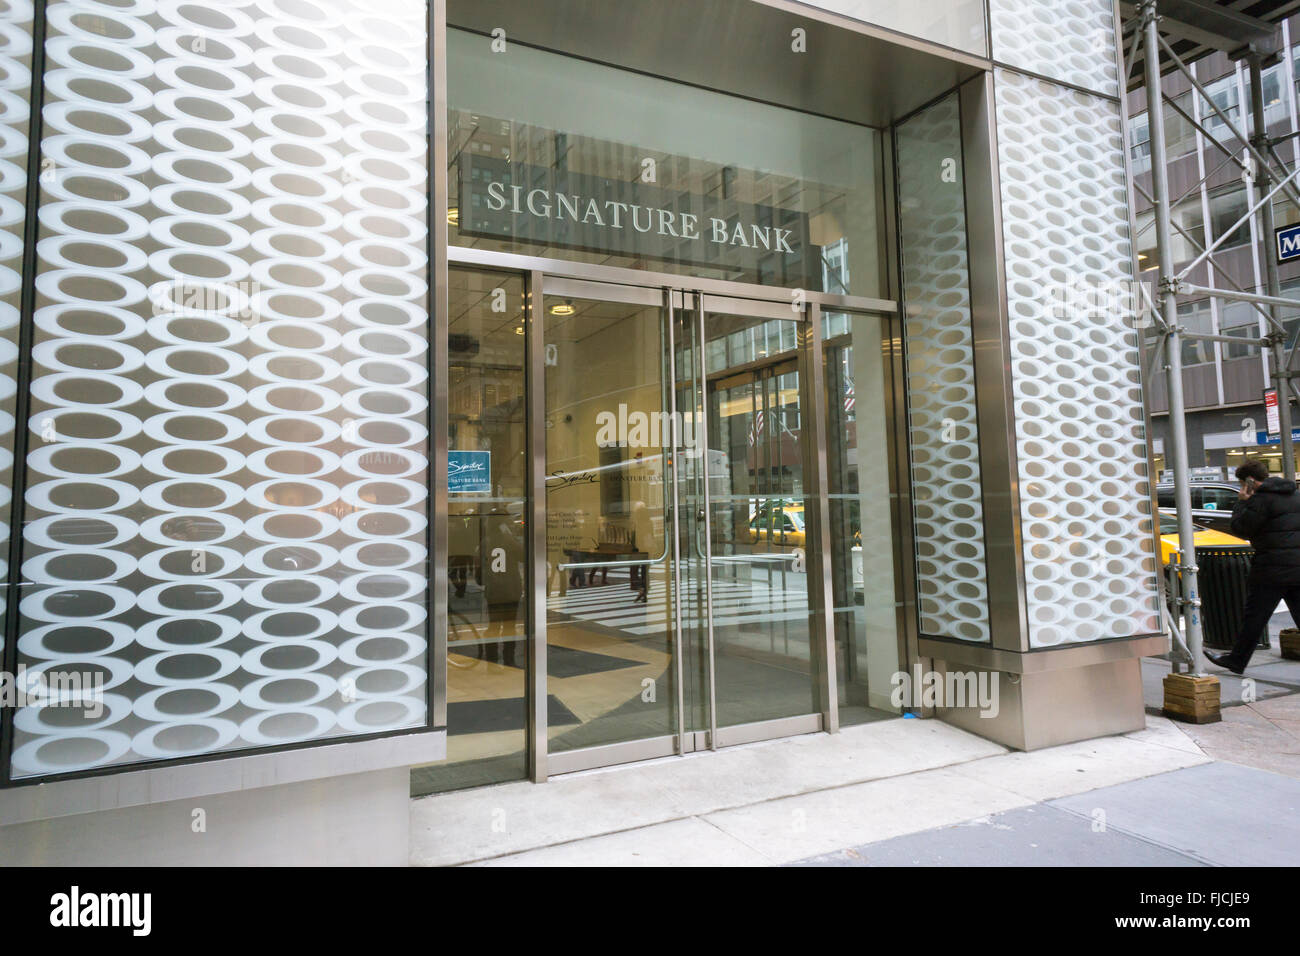 Signature Bank High Resolution Stock Photography and Images - Alamy